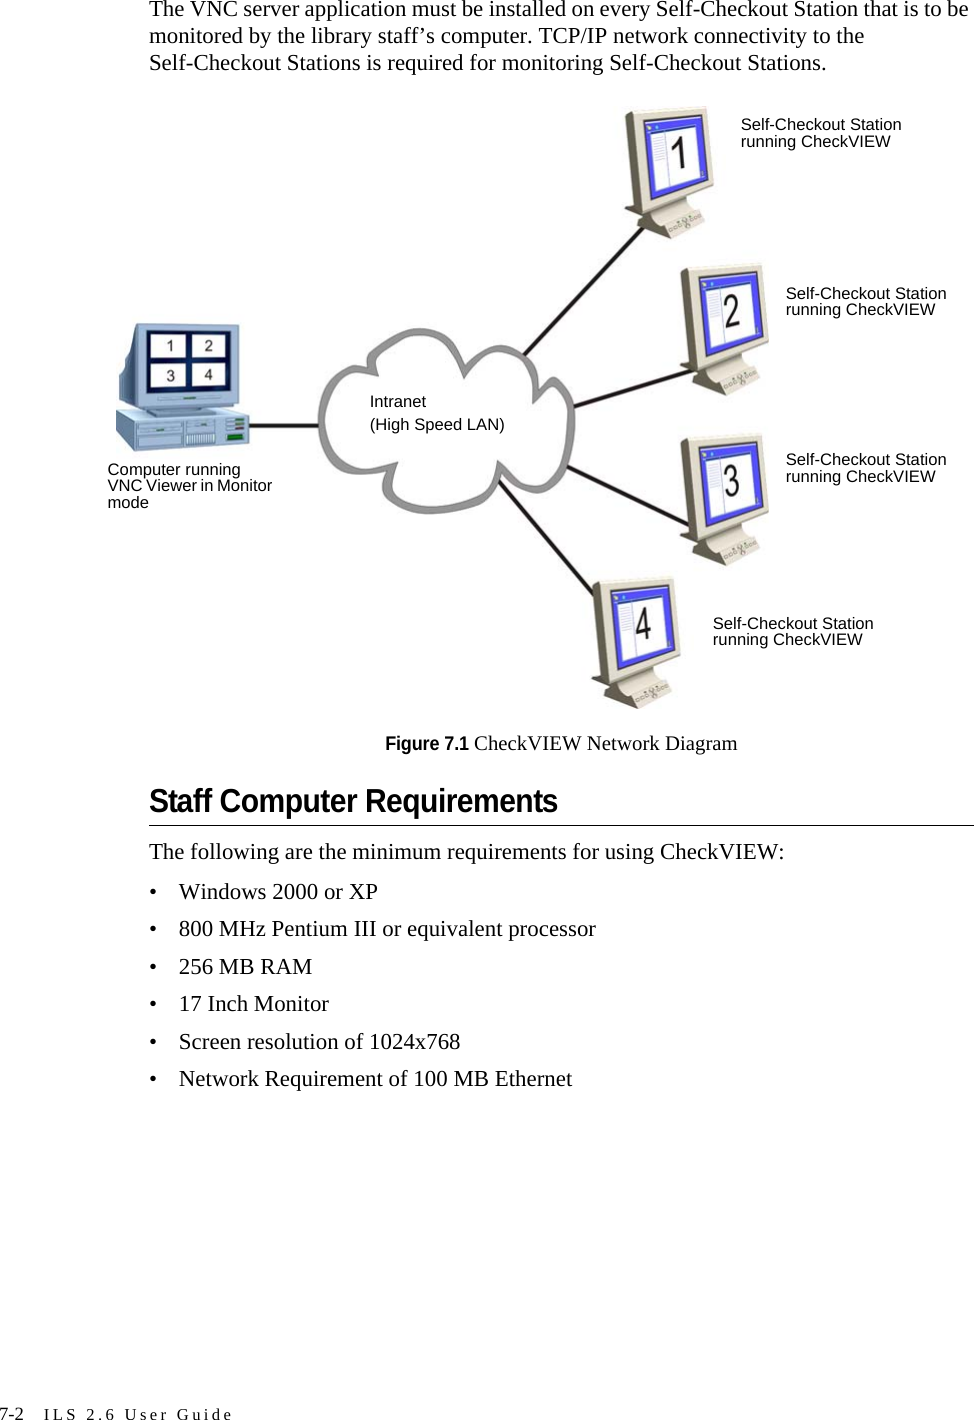 7-2 ILS 2.6 User GuideThe VNC server application must be installed on every Self-Checkout Station that is to be monitored by the library staff’s computer. TCP/IP network connectivity to the Self-Checkout Stations is required for monitoring Self-Checkout Stations.Figure 7.1 CheckVIEW Network DiagramStaff Computer RequirementsThe following are the minimum requirements for using CheckVIEW:• Windows 2000 or XP• 800 MHz Pentium III or equivalent processor• 256 MB RAM• 17 Inch Monitor• Screen resolution of 1024x768• Network Requirement of 100 MB EthernetIntranet(High Speed LAN)Computer running VNC Viewer in Monitor modeSelf-Checkout Station running CheckVIEW Self-Checkout Station running CheckVIEW Self-Checkout Station running CheckVIEW Self-Checkout Station running CheckVIEW